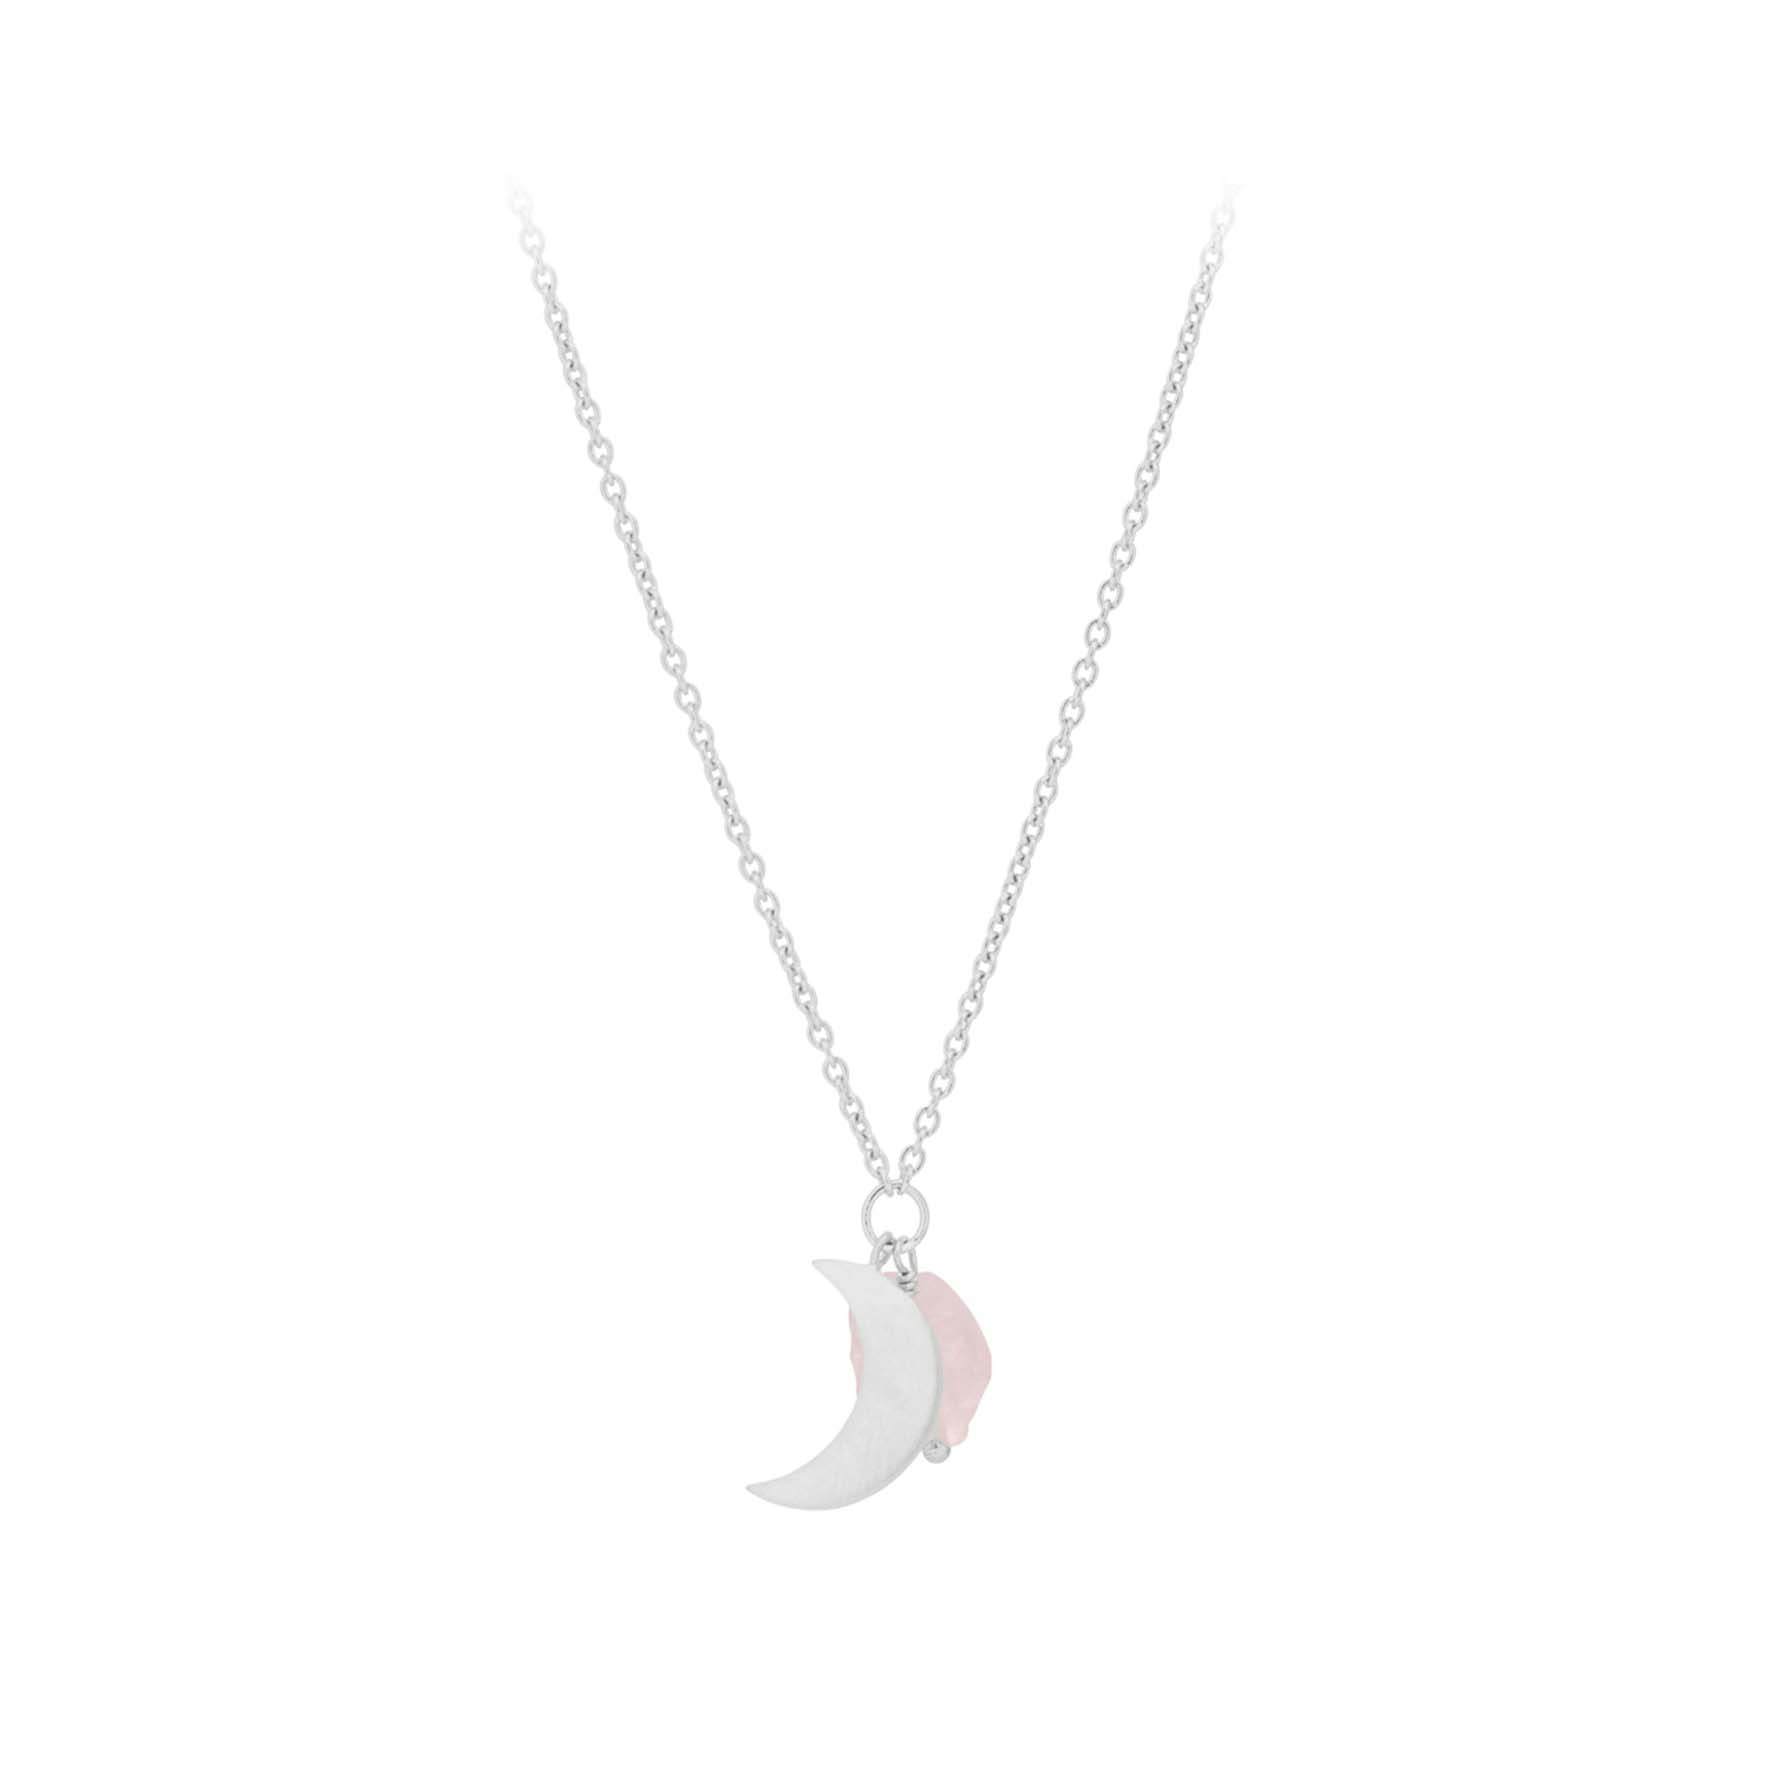 Lunar Orb Necklace from Pernille Corydon in Silver Sterling 925